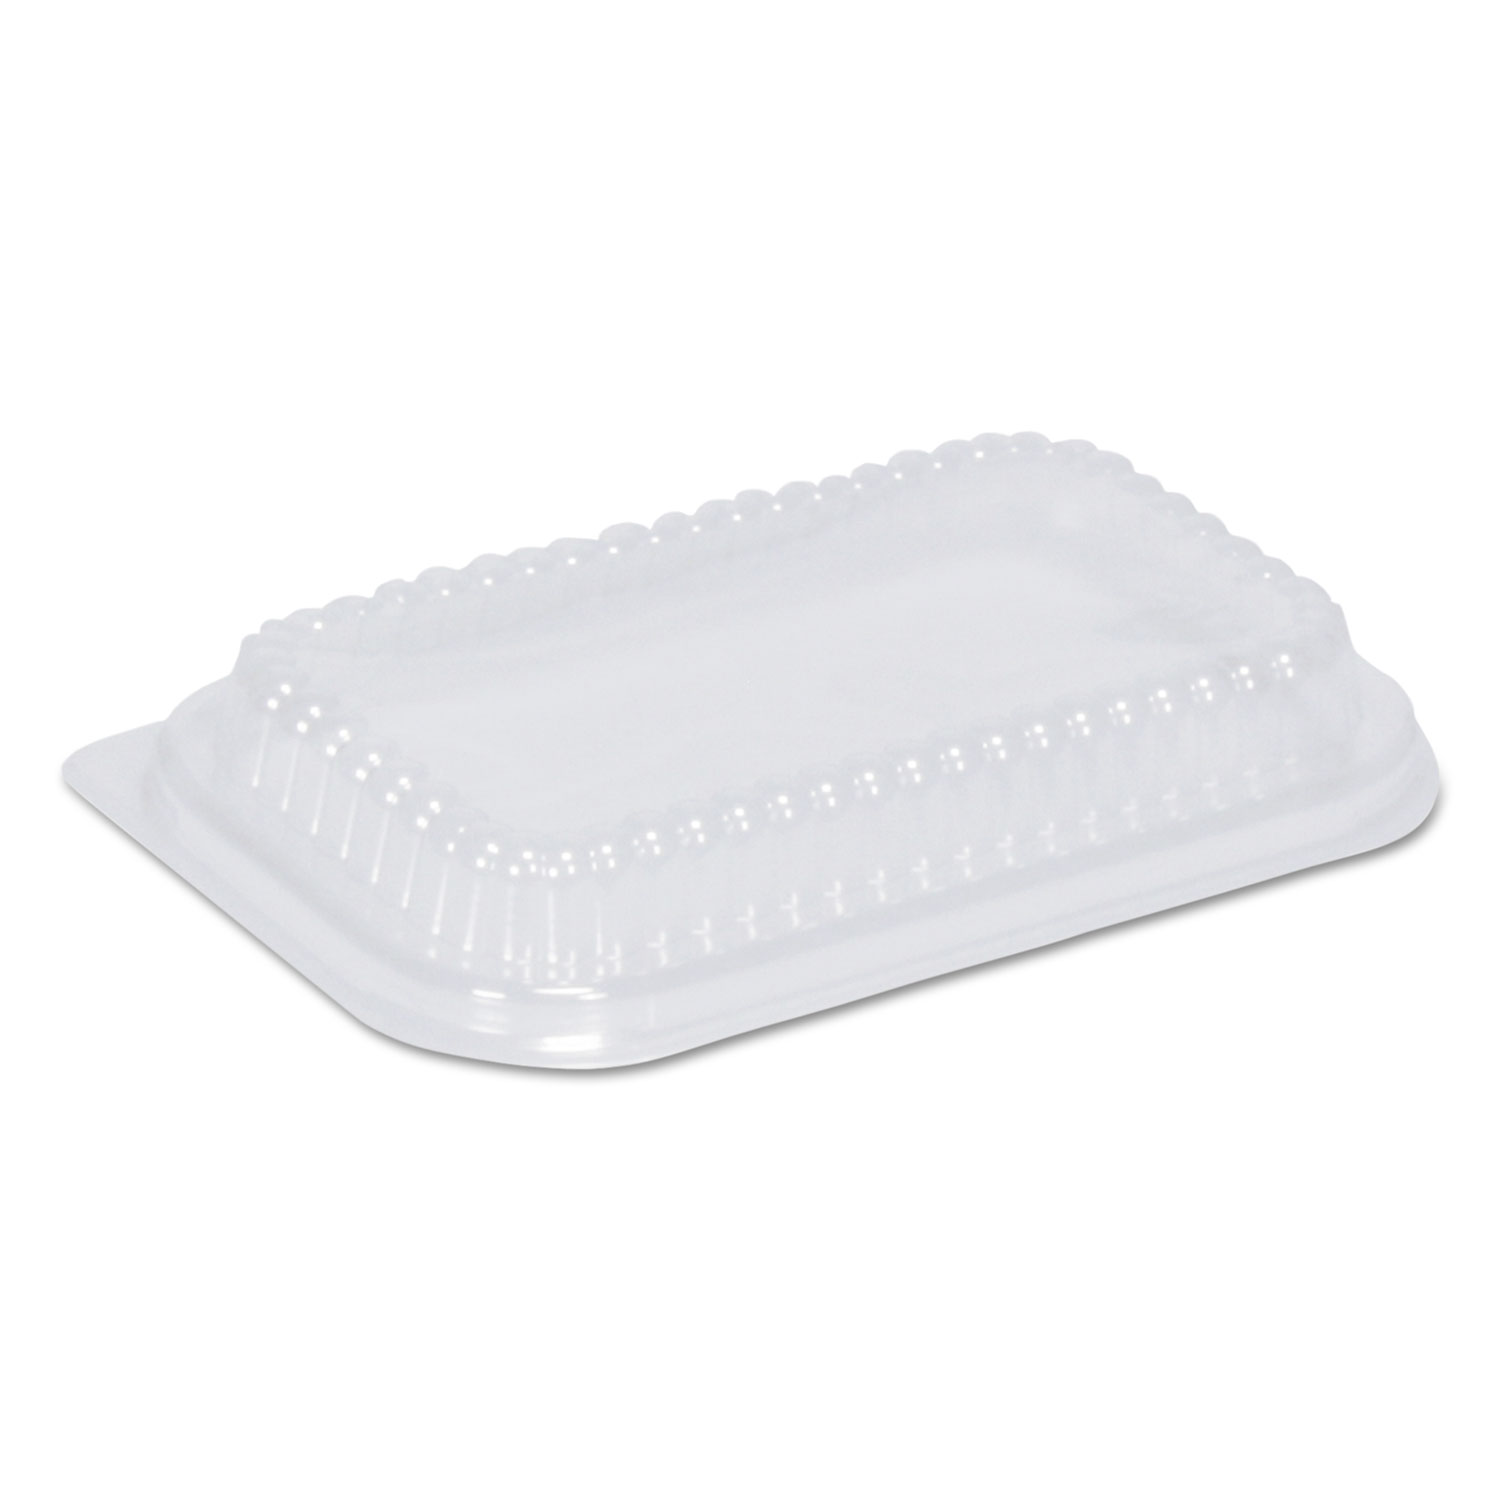 Plastic Dome Lid for Loaf Pan, Clear, 6 1/8 x 3 3/4 x 7/8, 200/Carton